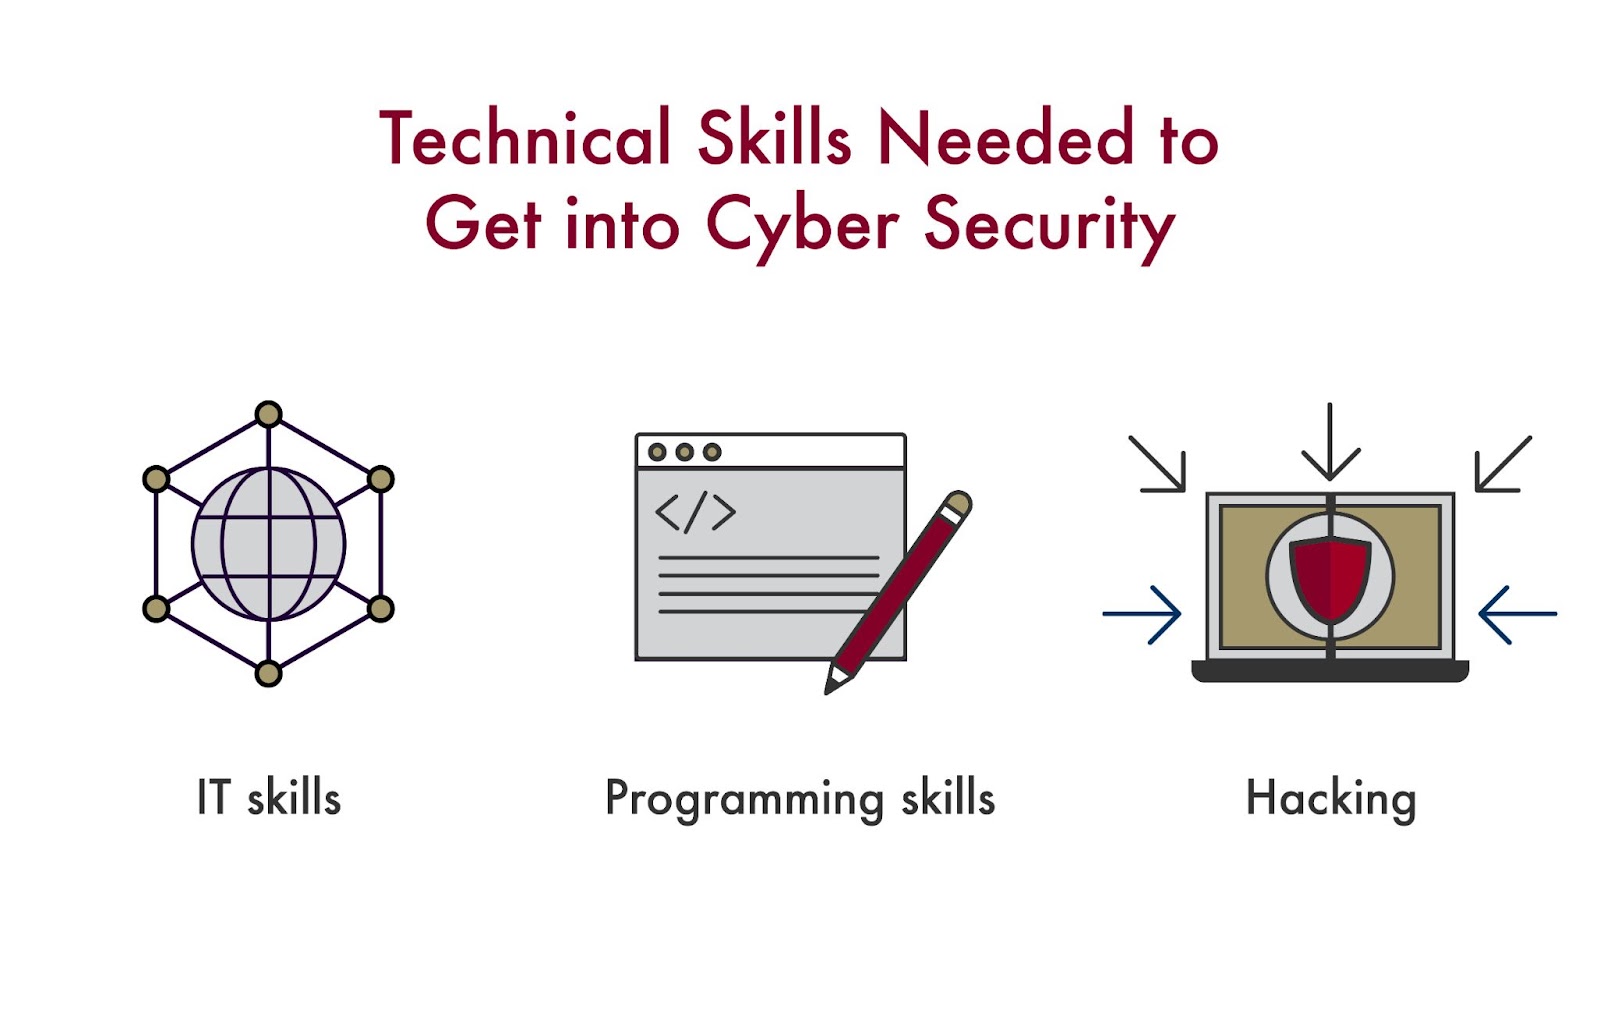 A graphic highlighting three technical skills needed to get into cyber security.